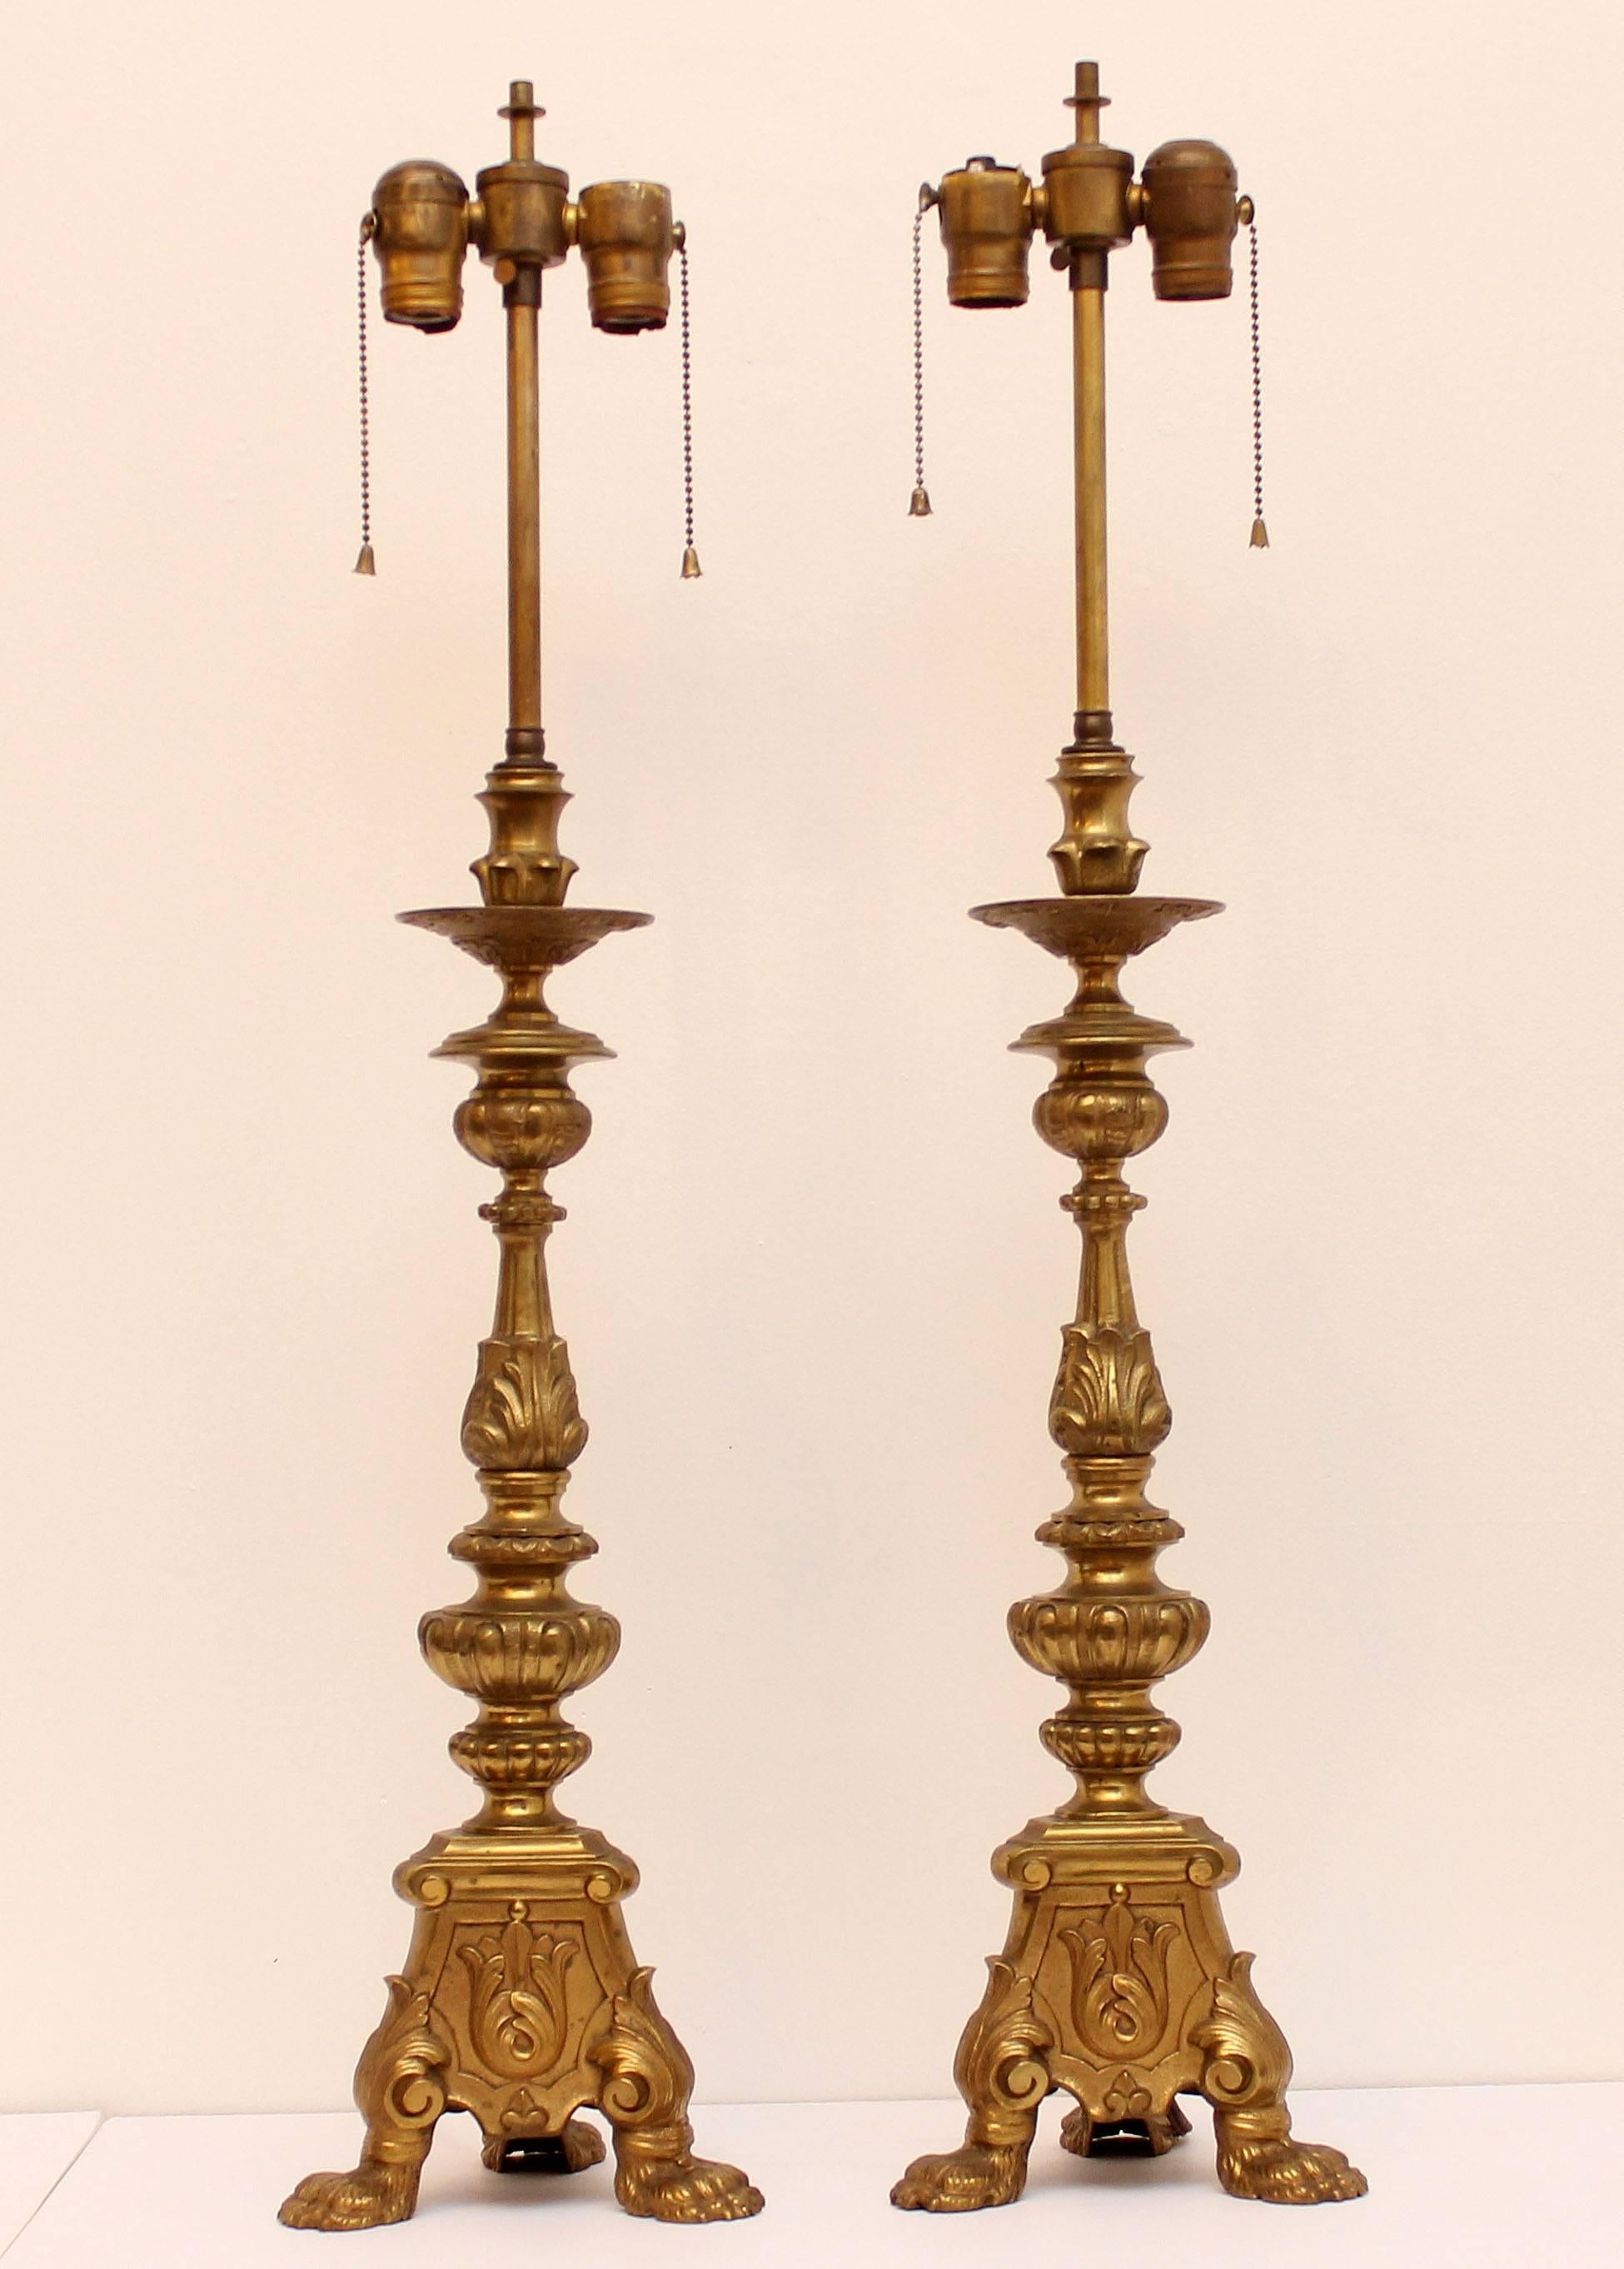 Pair antique brass Renaissance style Pricket table lamps. Fine quality castings, early 20th century.